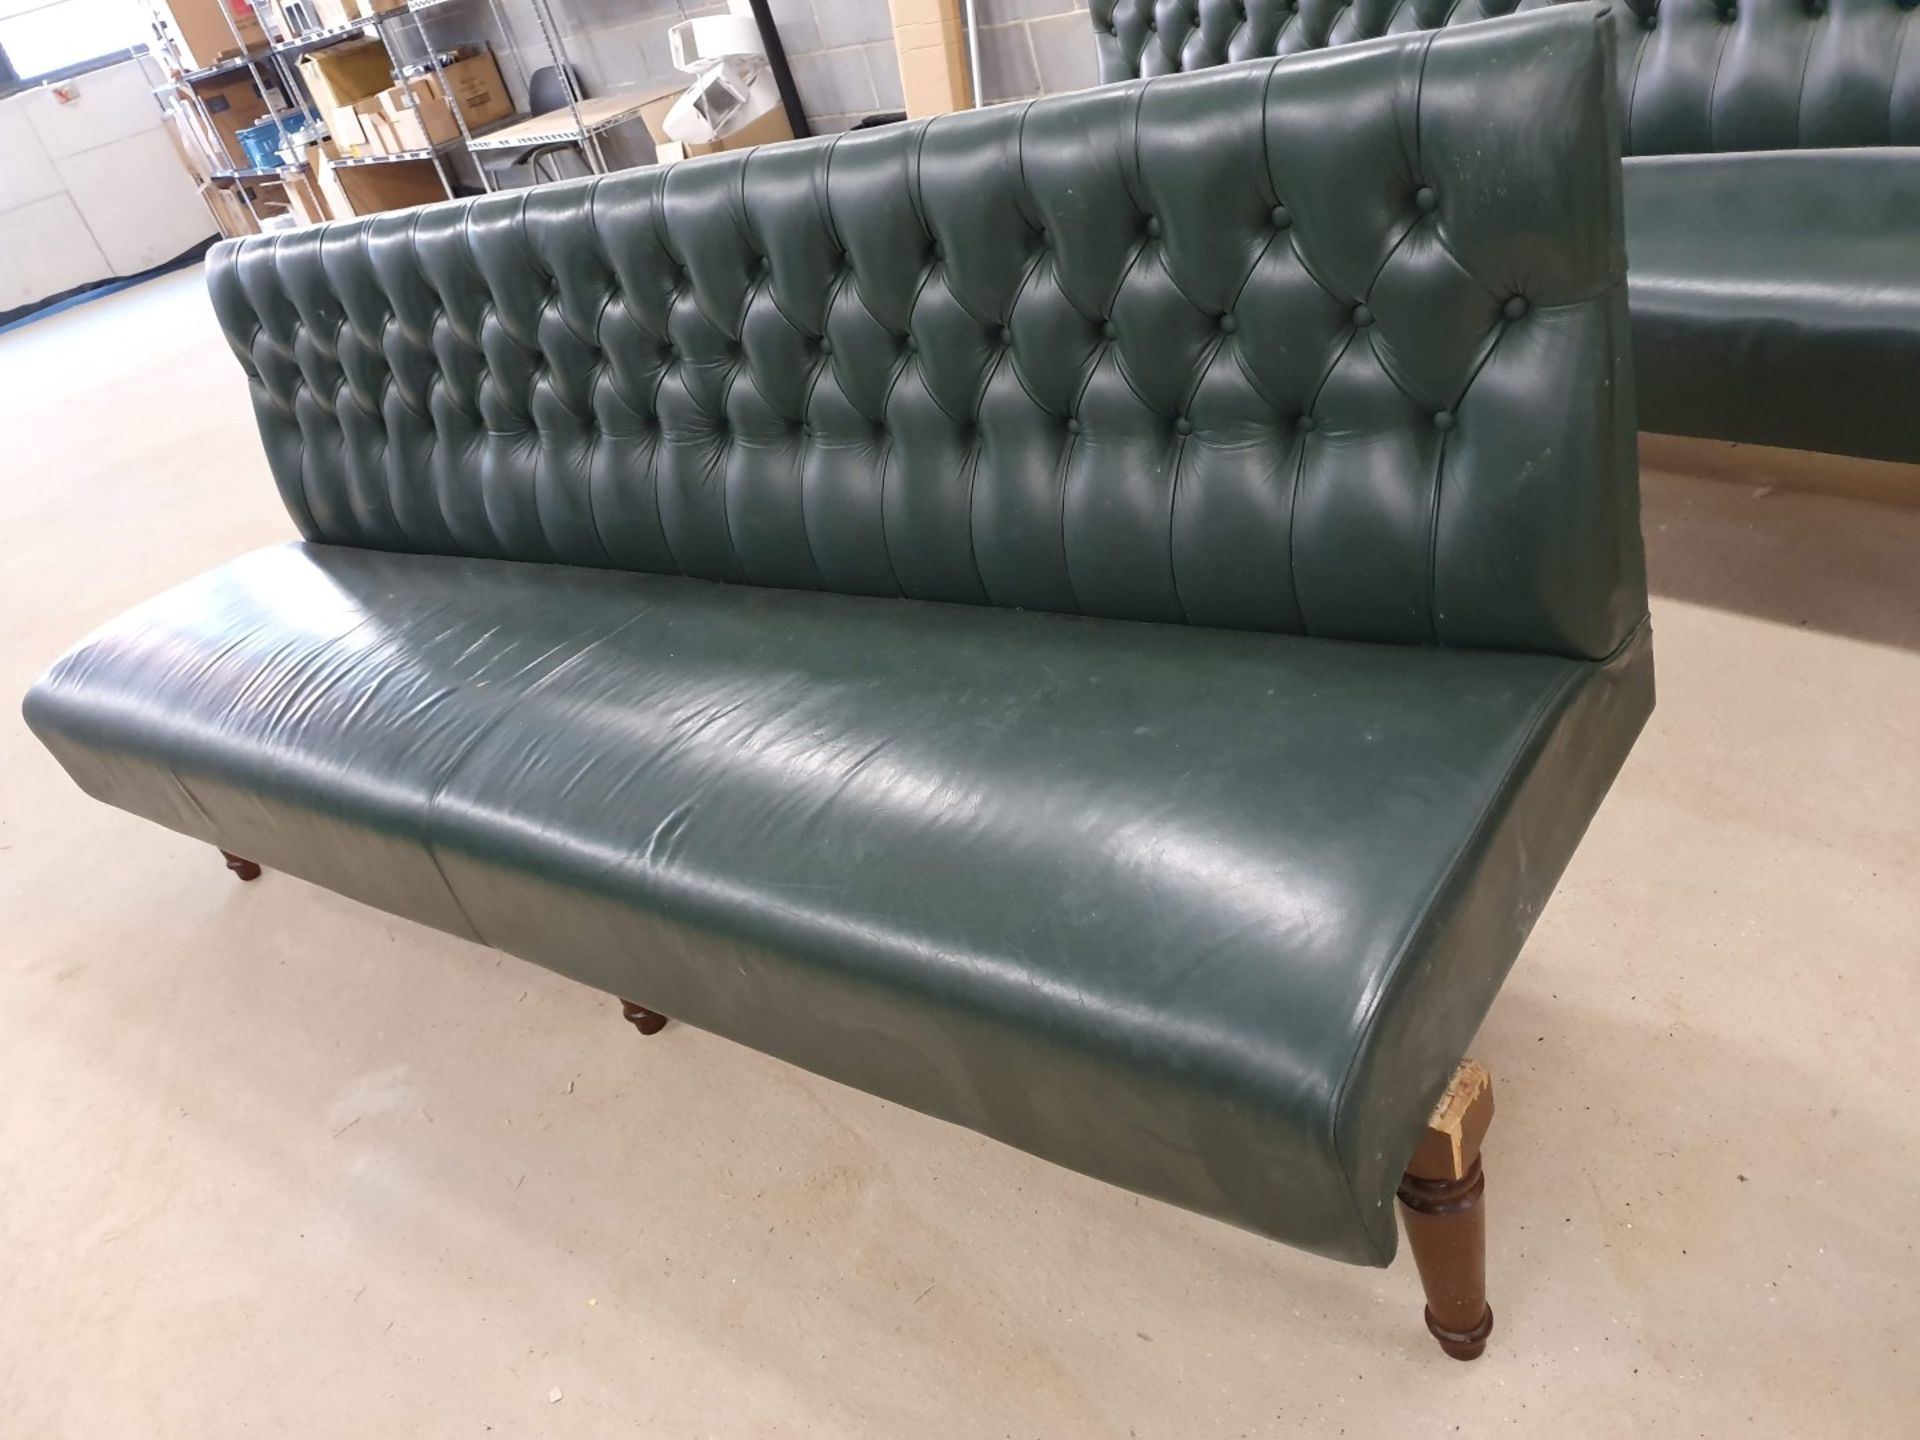 1 x Restaurant Seating Bench Upholstery in Green With Studded Back and Oak Turned Legs - H91 - Image 4 of 10